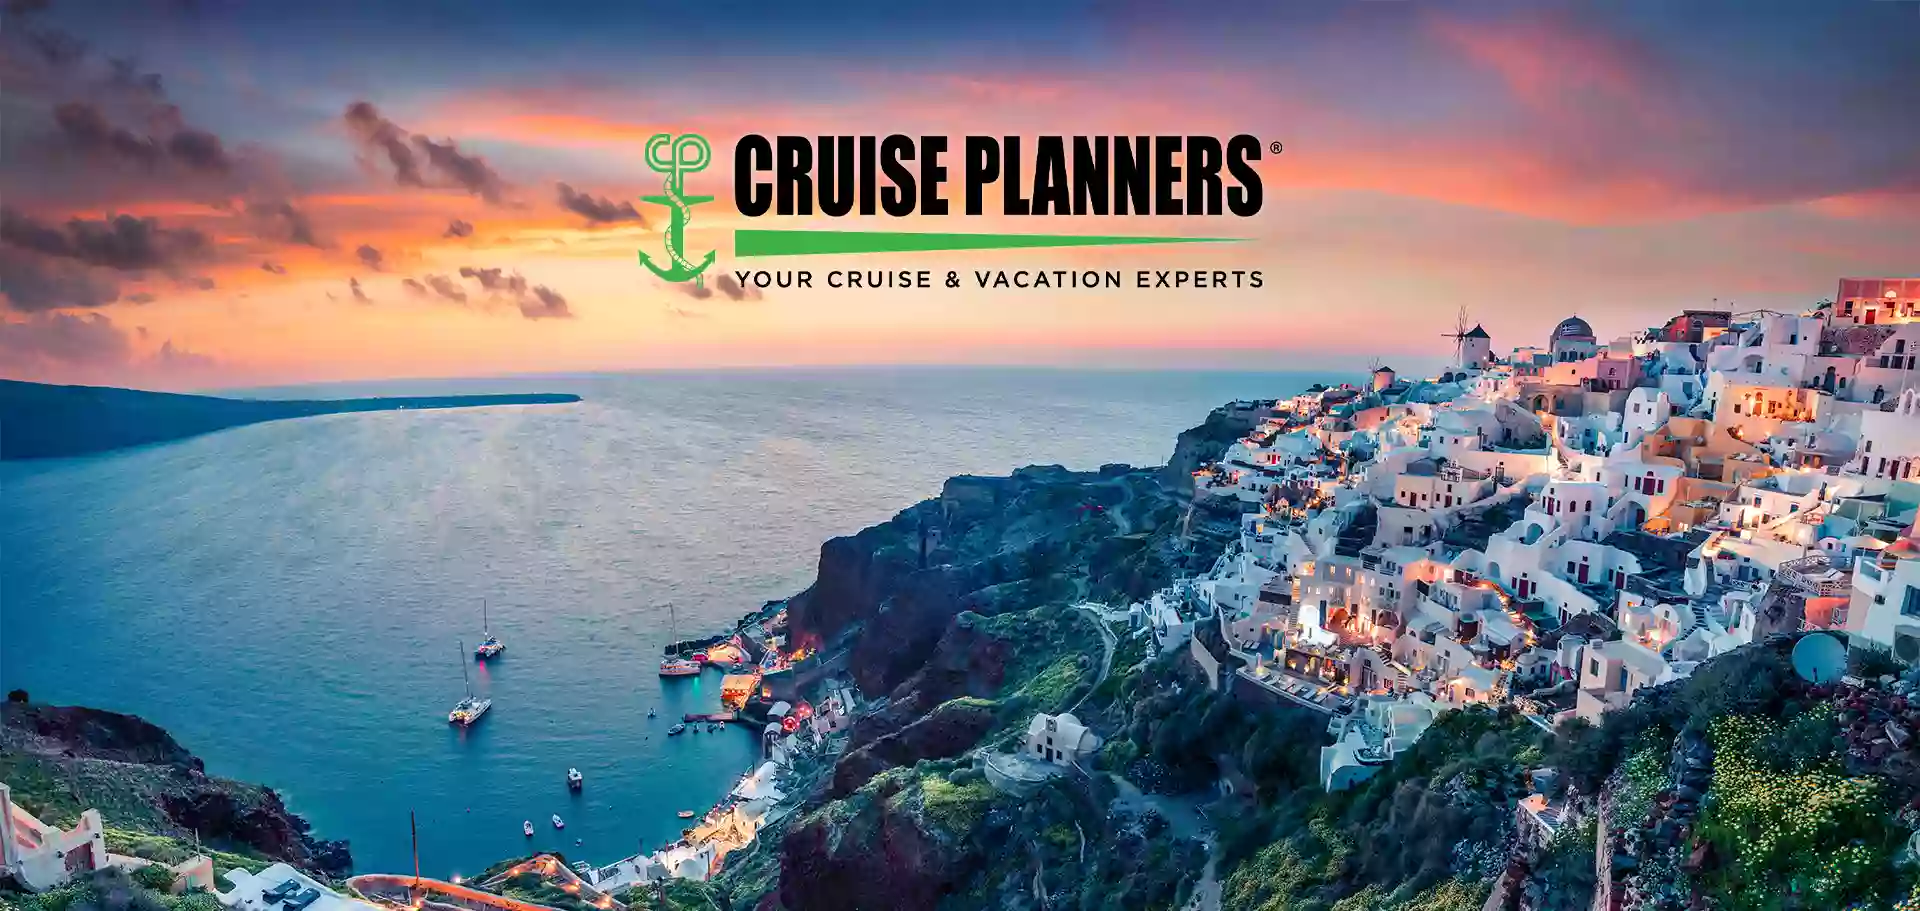 Cruise Planners - Chris and Patti Ortbals